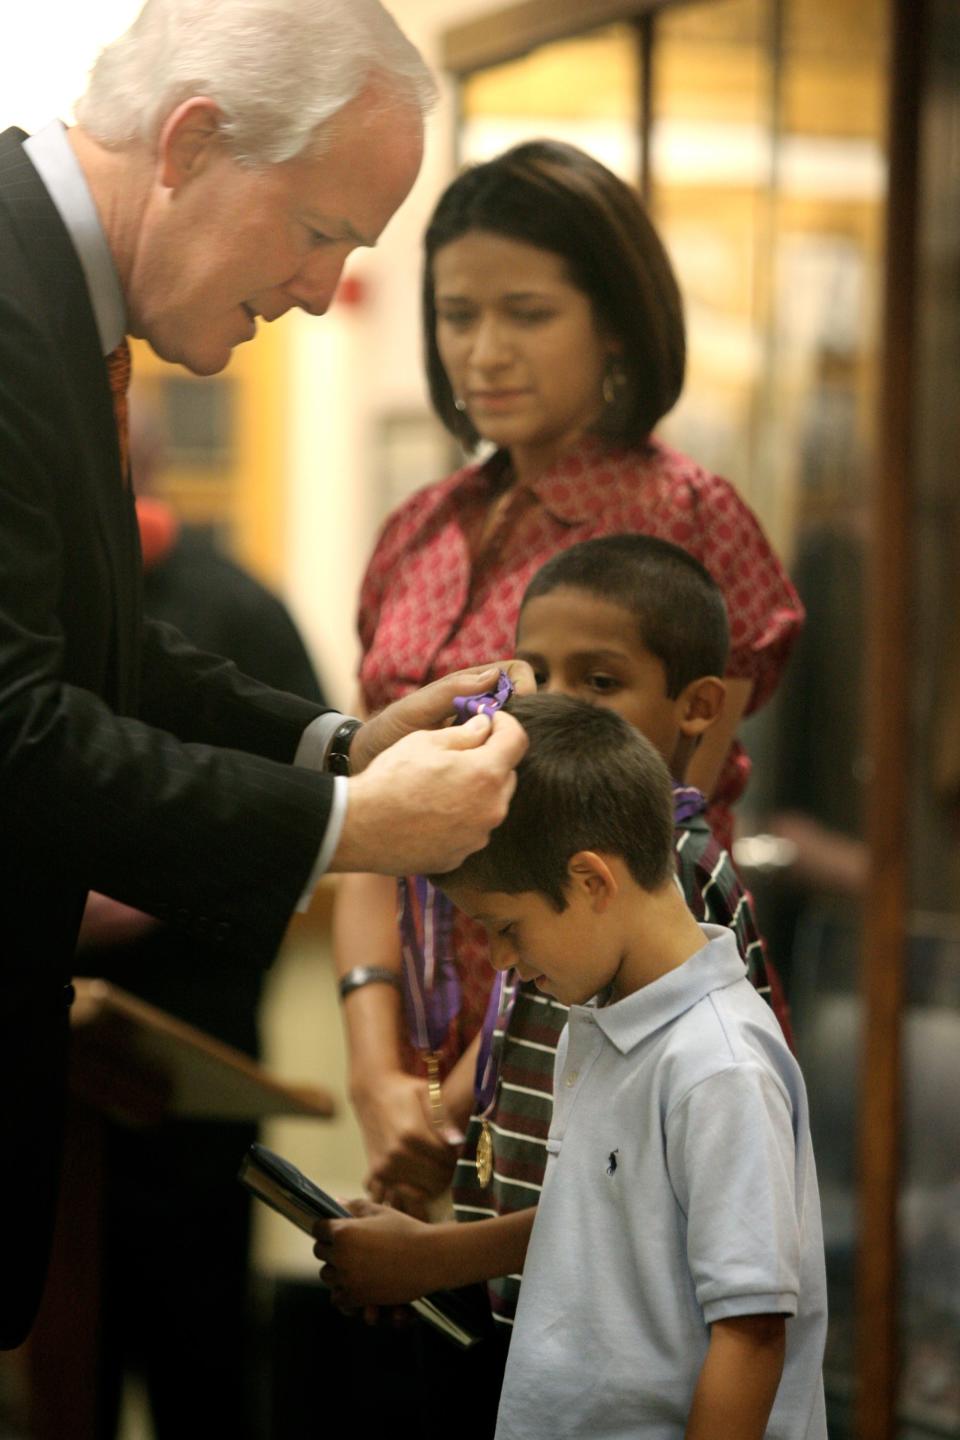 Nov. 12, 2007: Sen. John Cornyn, R-Texas, left, presented a Gold Medal of Remembrance to Nathan Locklear, 6, on Sunday at Fort Bliss. Locklear, whose father, Sgt. Velton Locklear III, was killed Sept. 23, 2006, in Iraq was among children from three families honored with the Gold Medals that are presented to the children of soldiers killed in action.